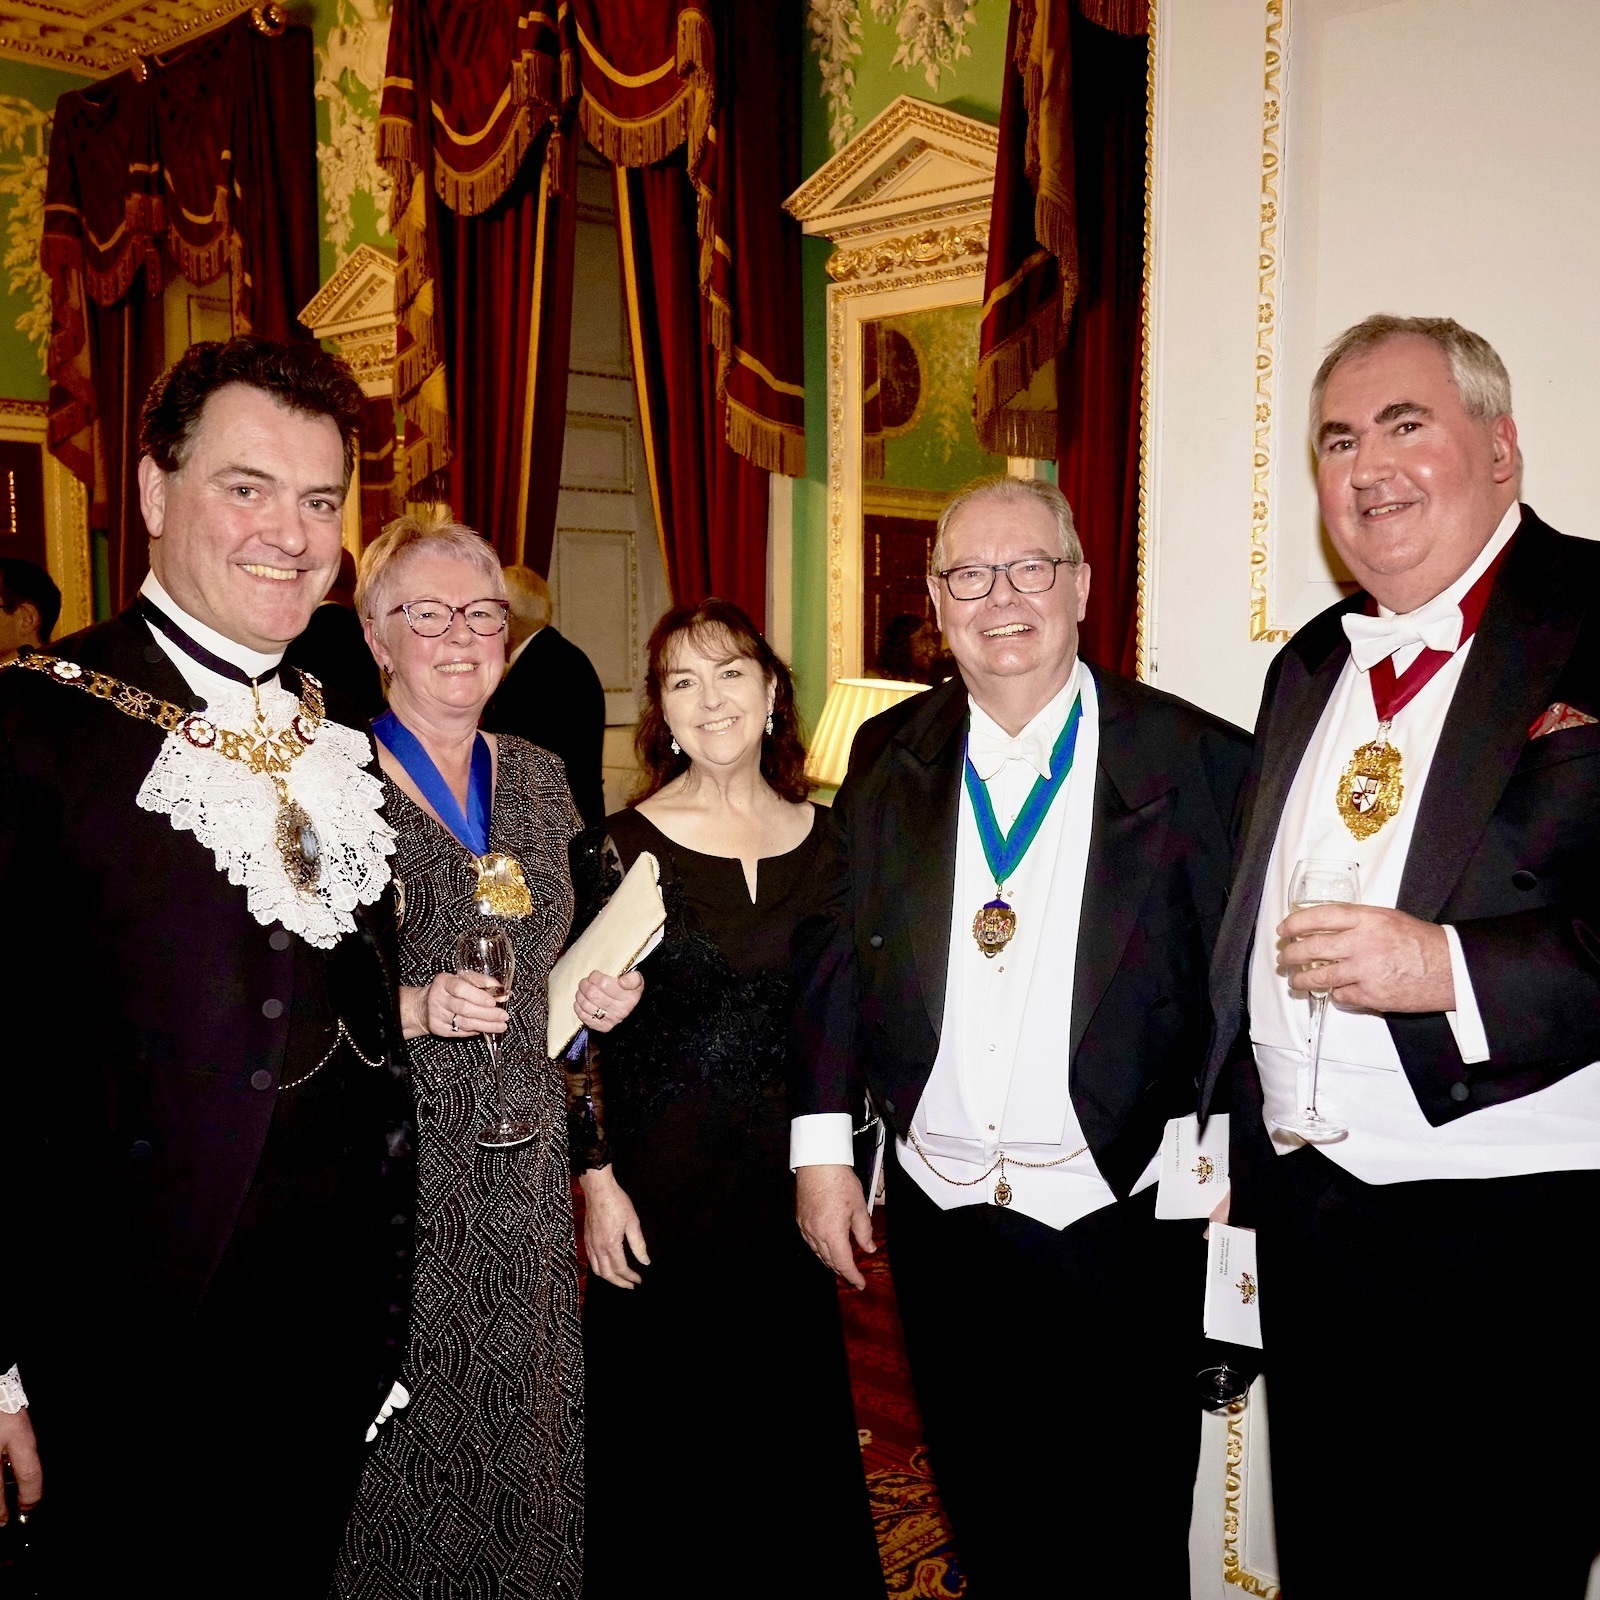 With the Lord Mayor at Mansion House